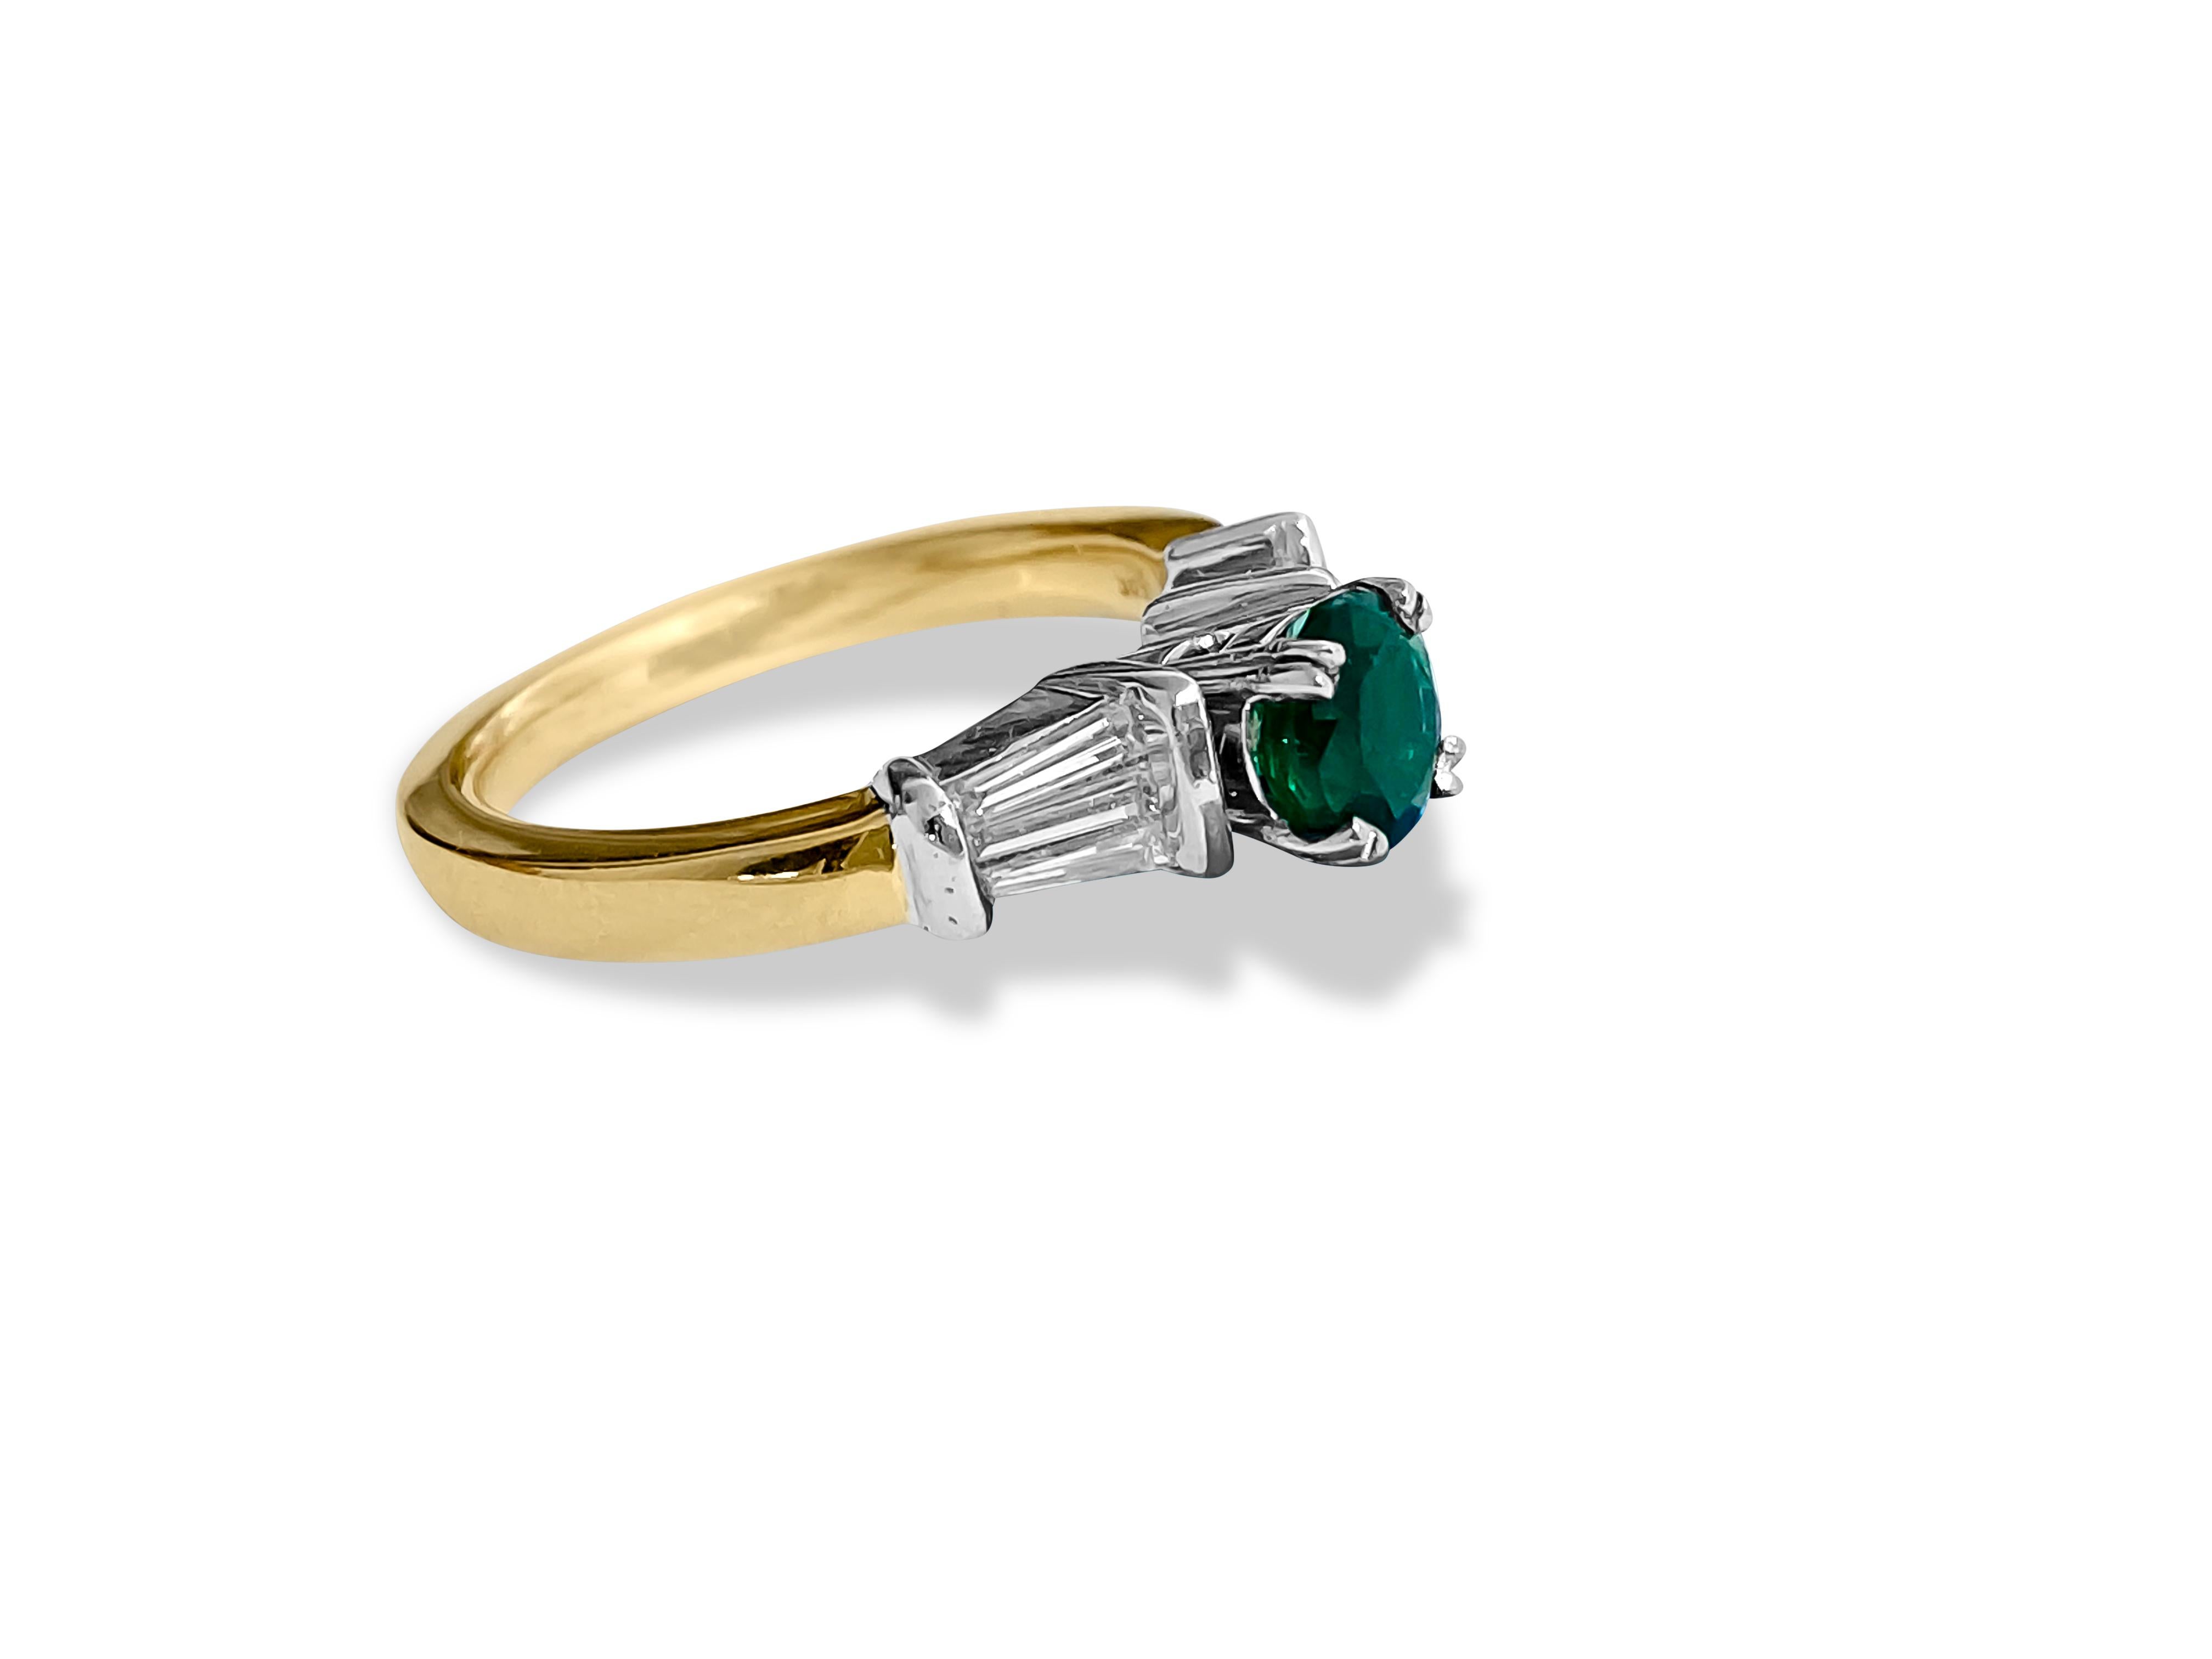 Fashioned from radiant 14k yellow gold, this captivating engagement ring features a stunning 1.05 carat round-cut emerald, a natural gem mined from the earth, gracing its center. Enhancing its allure, shimmering baguette-cut diamonds totaling 1.25